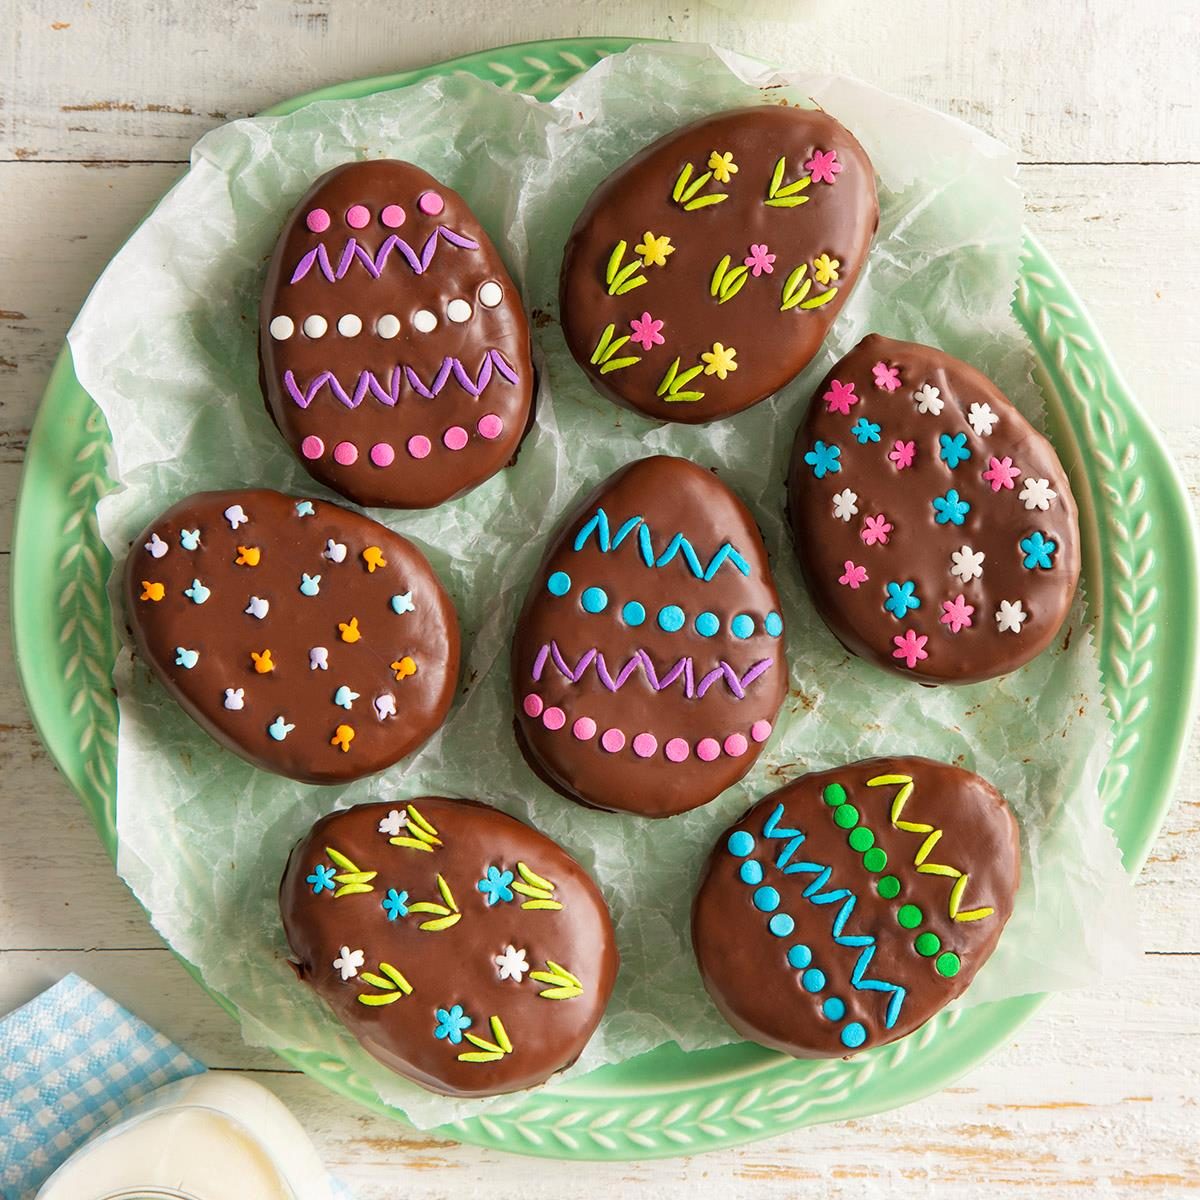 The Best Chocolate Easter Eggs for Any Basket, According To Our